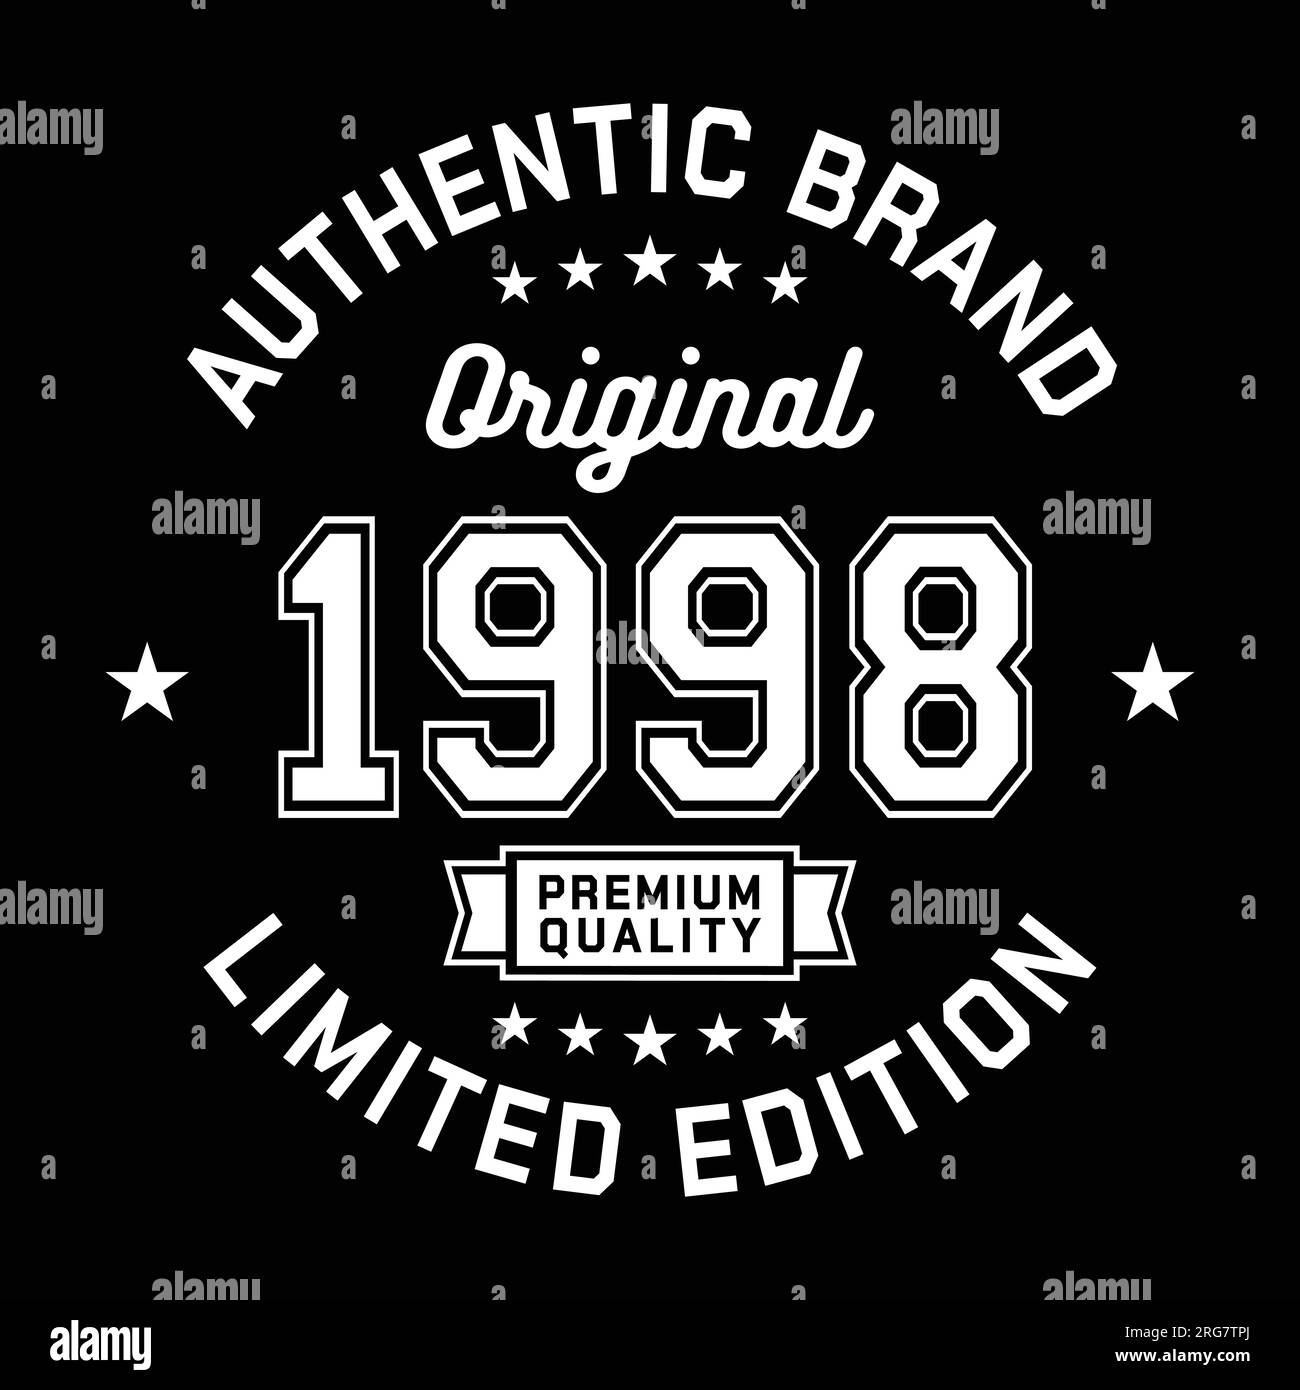 1998 Authentic brand. Apparel fashion design. Graphic design for t-shirt. Vector and illustration. Stock Vector